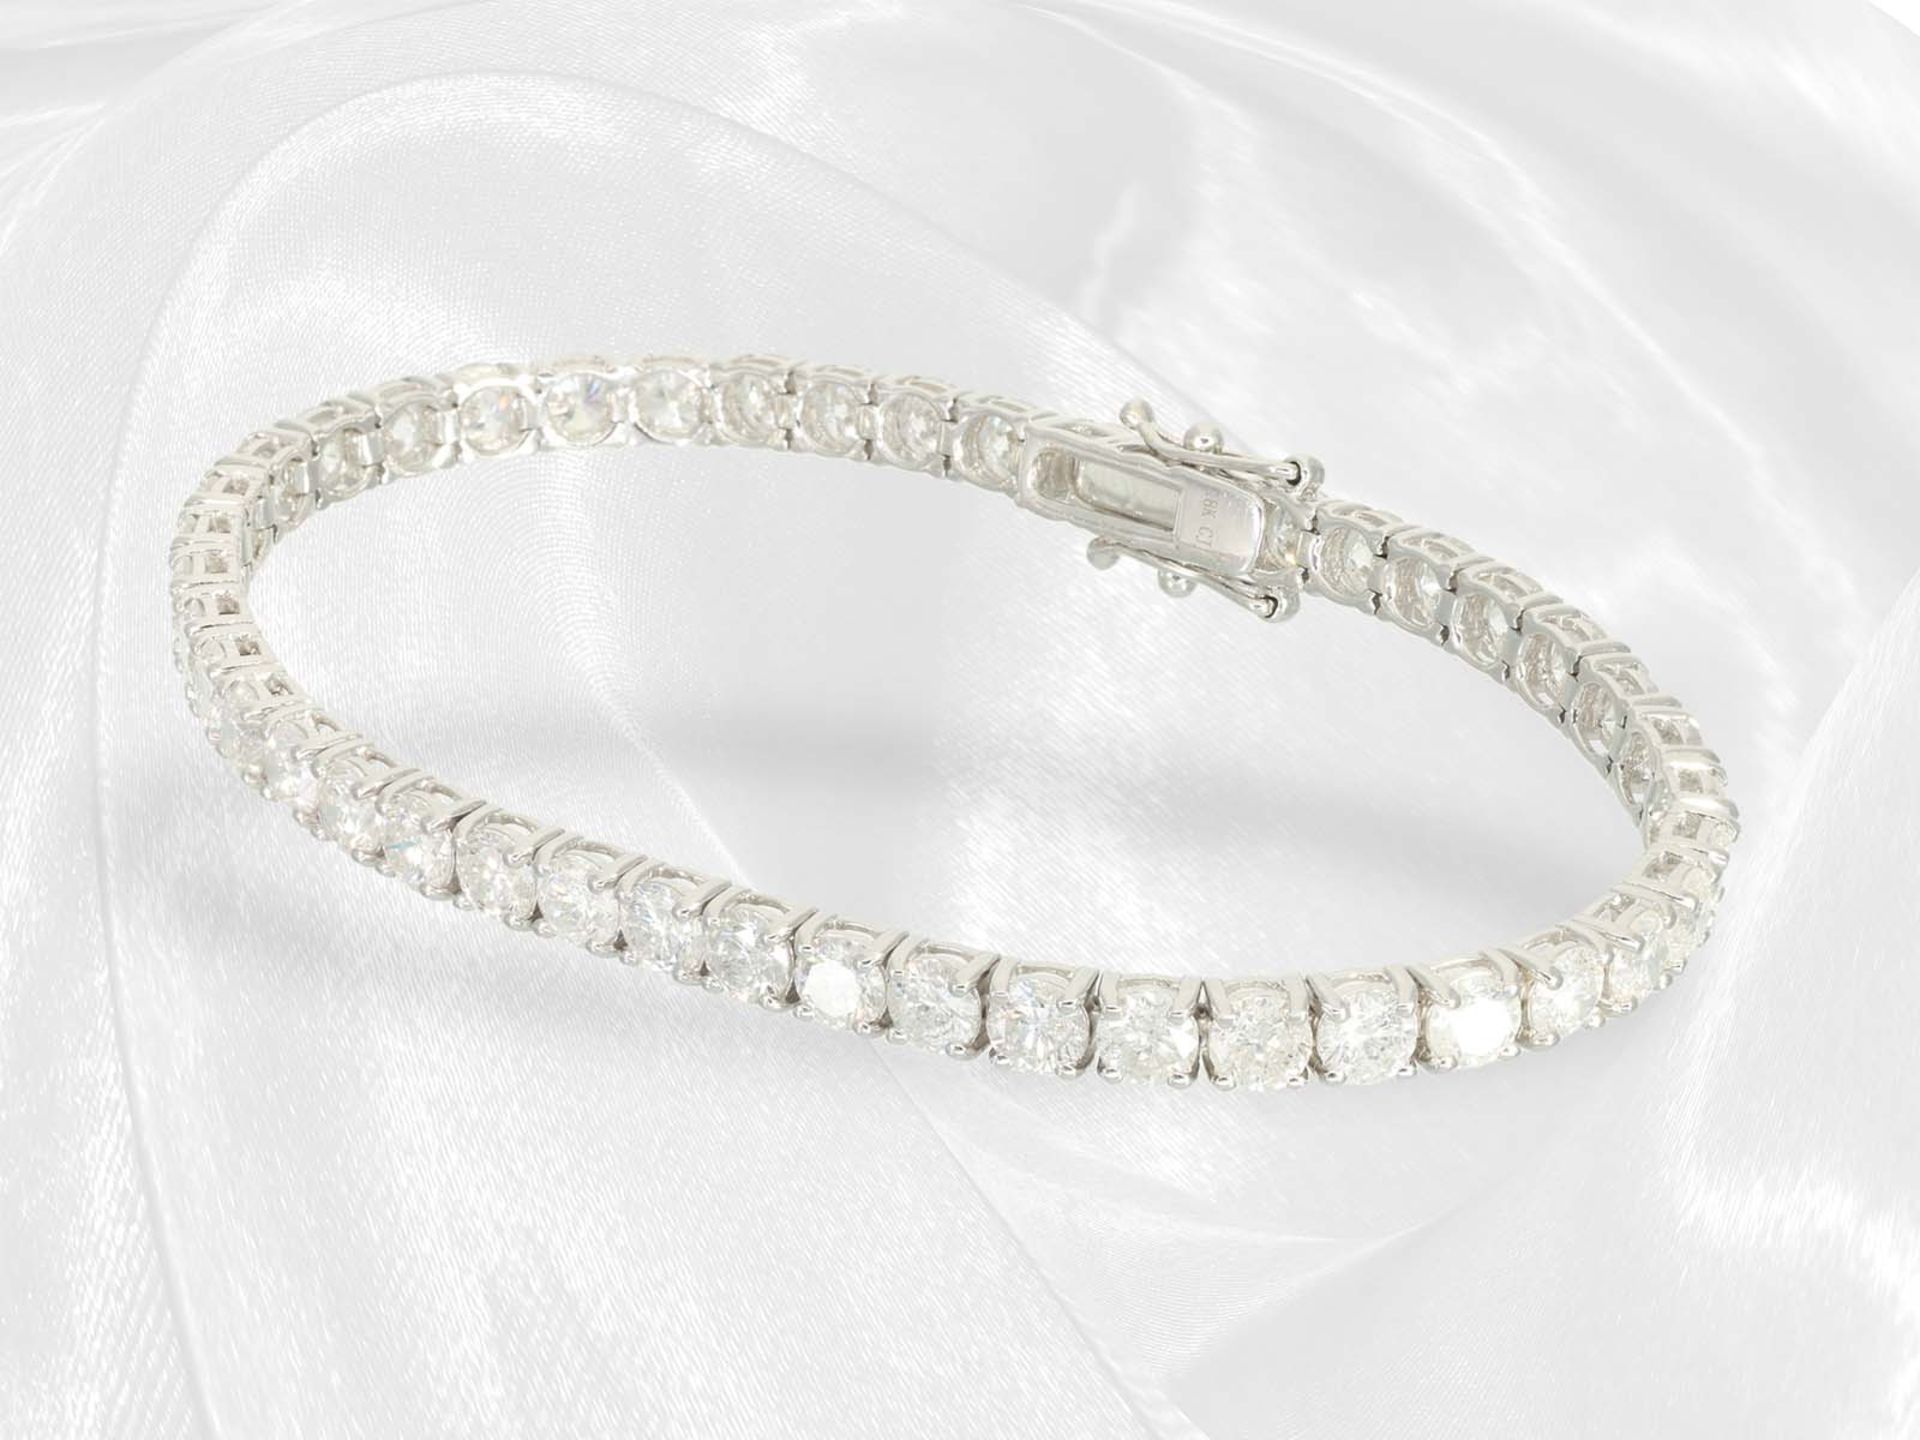 Bracelet: modern tennis bracelet with exceptionally large brilliant-cut diamonds, approx. 10.5ct - Image 3 of 5